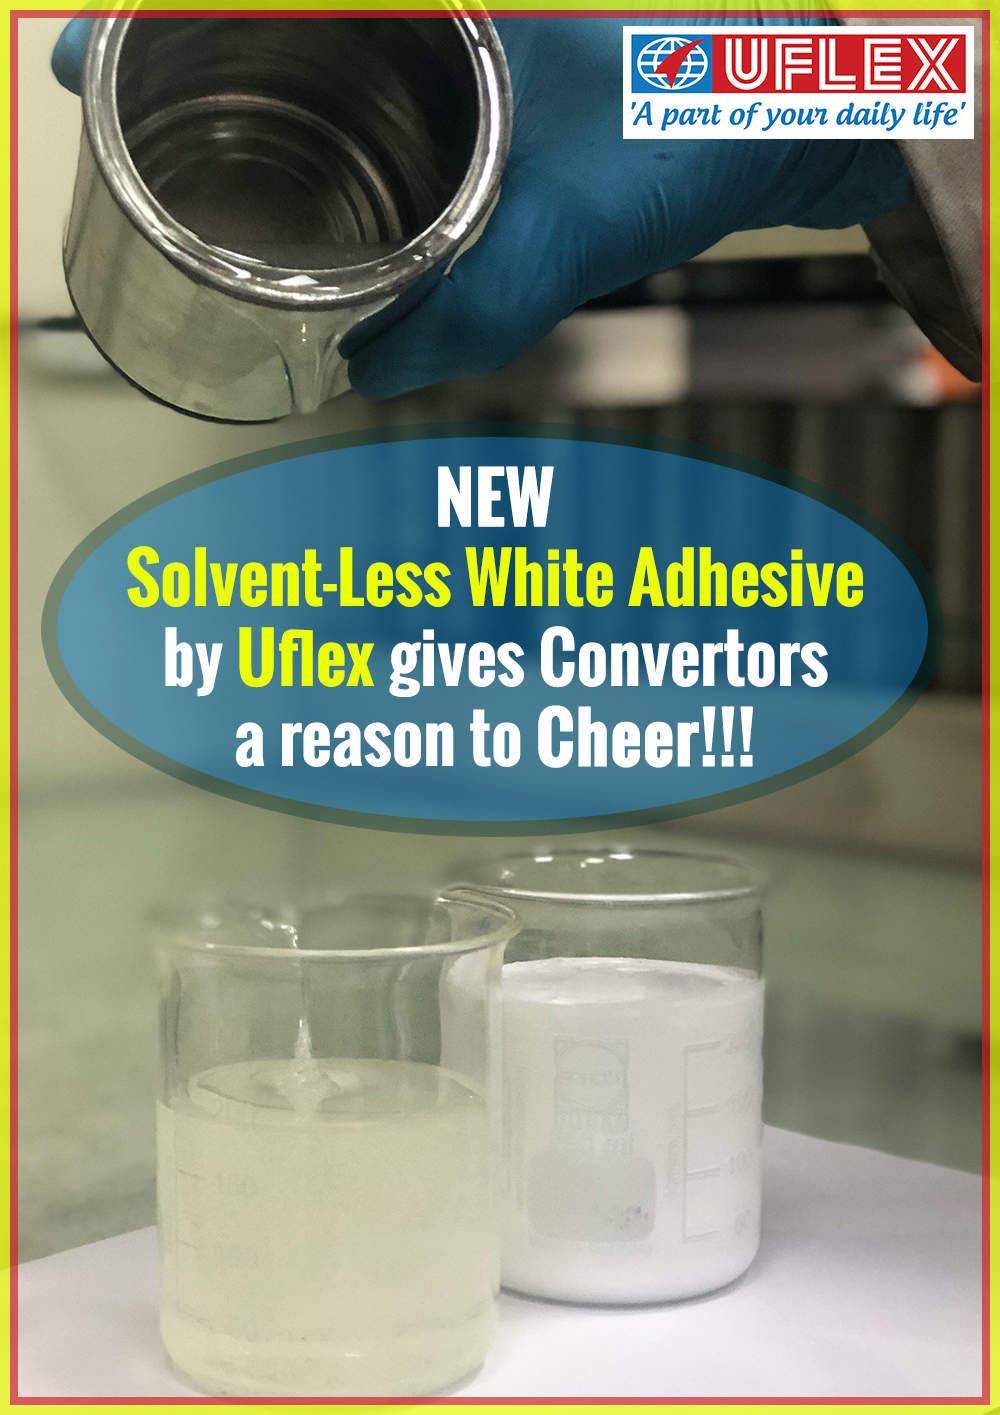 New Solvent-Less White Adhesive by Uflex gives Convertors a reason to Cheer